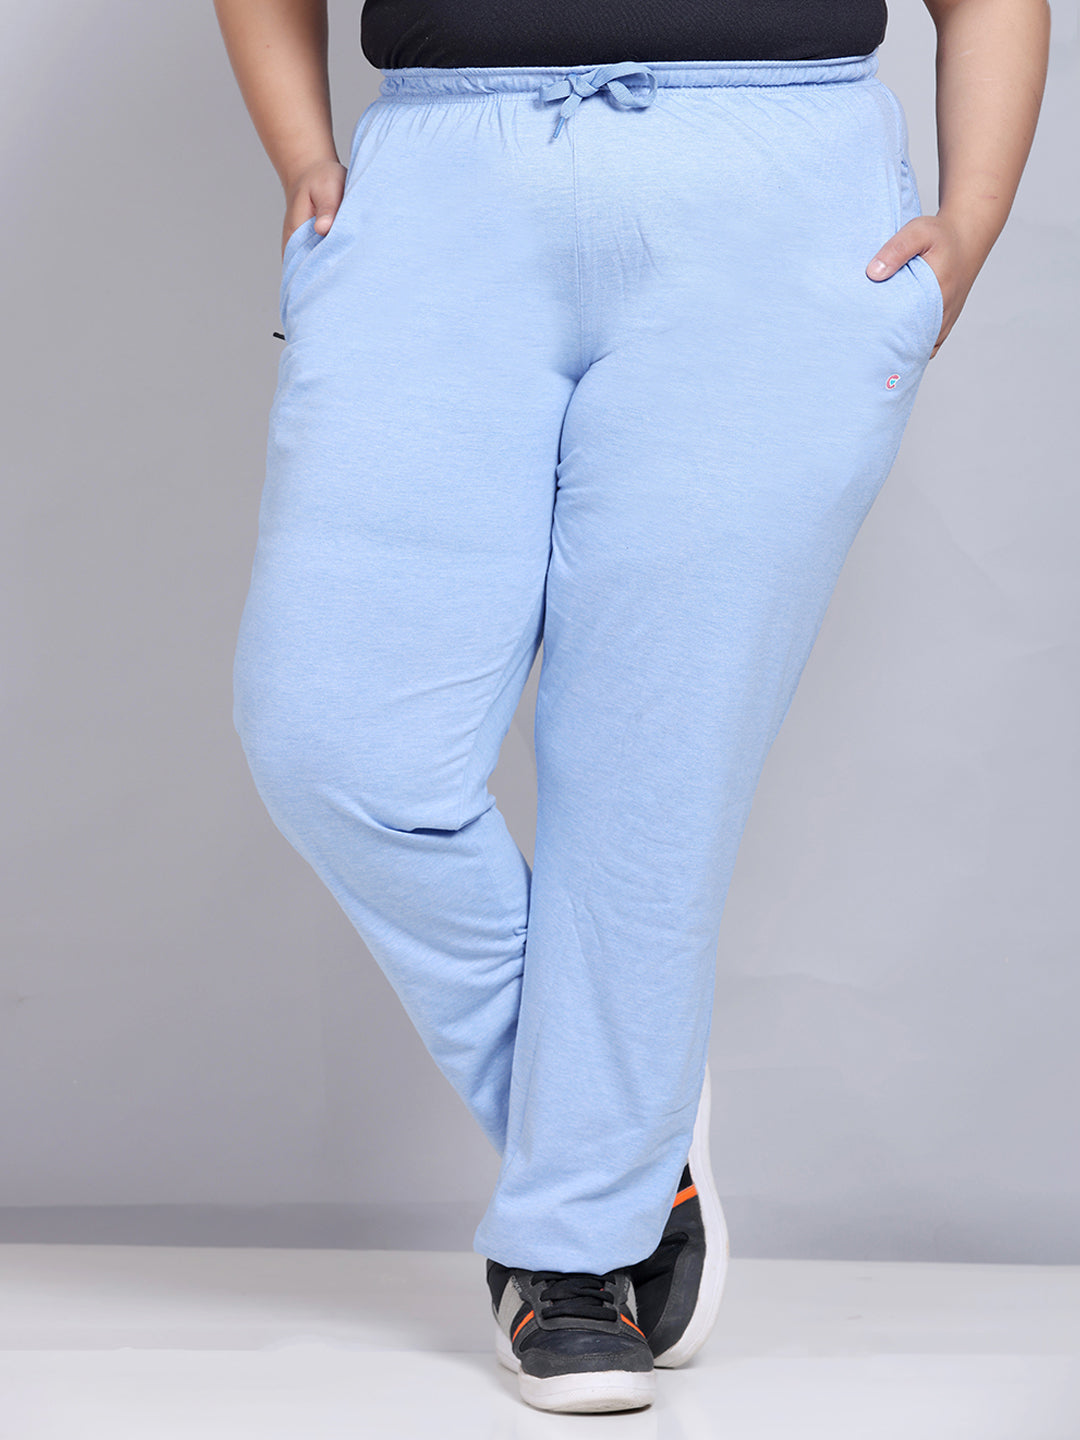 Stylish Cotton Track Pants For Women (Pack of 3) Online In India